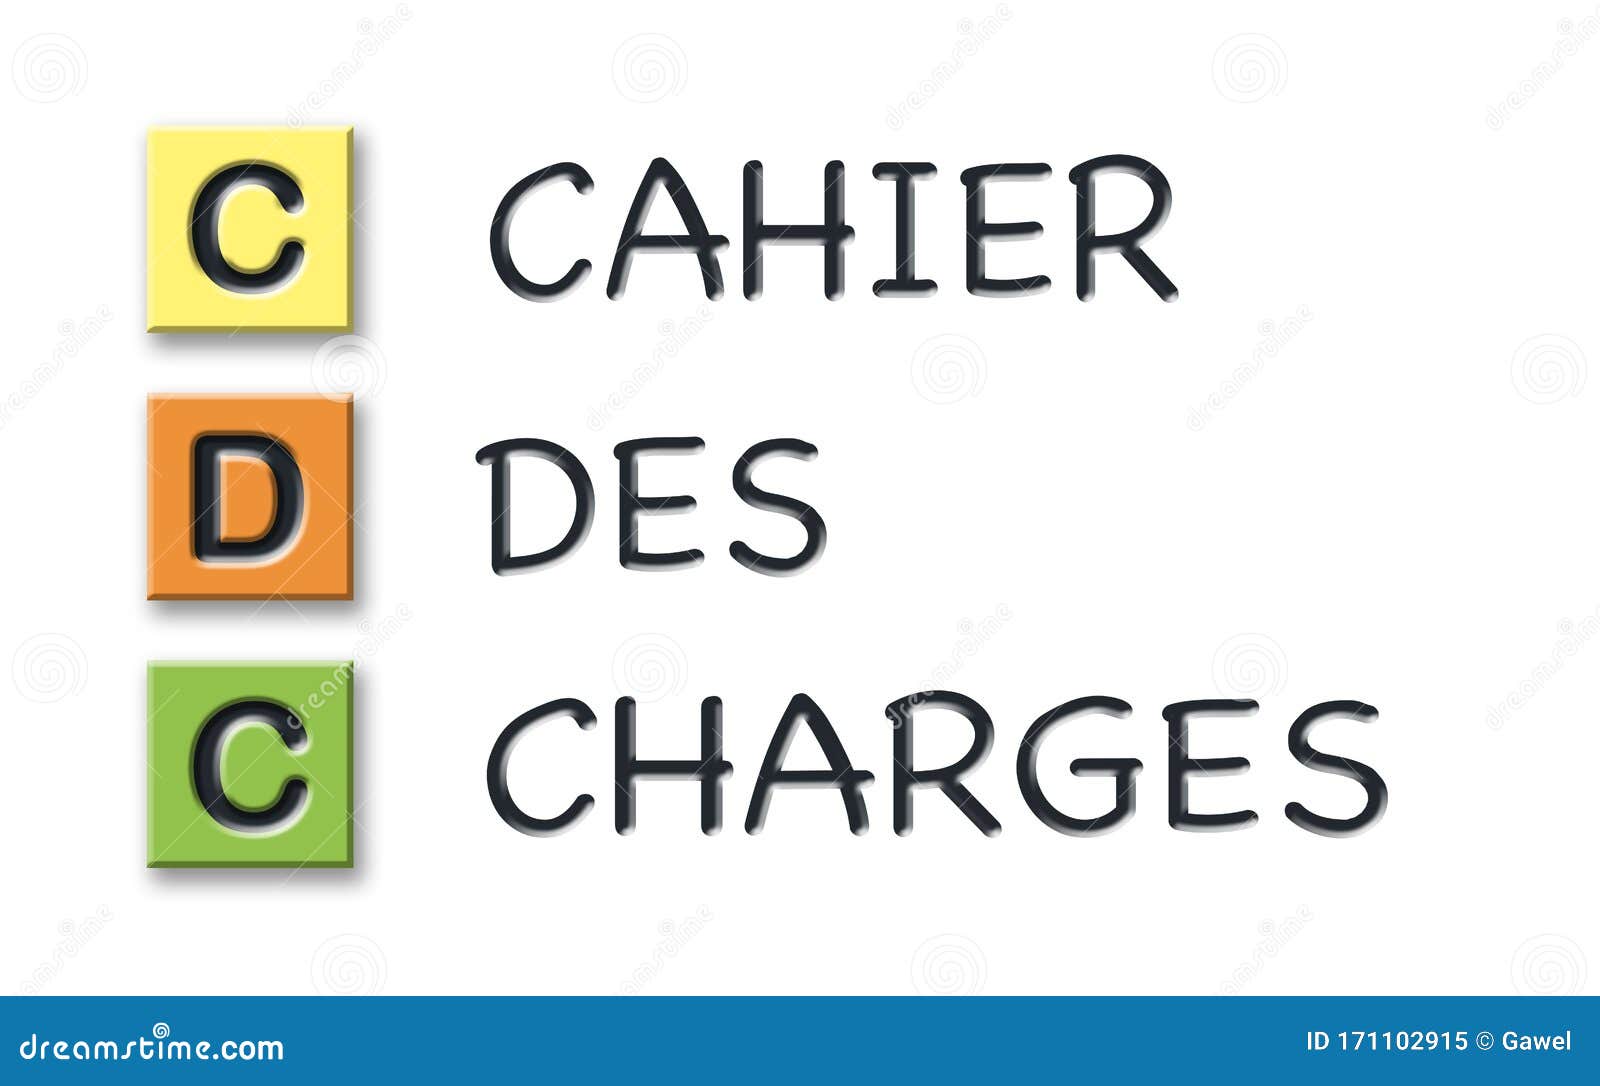 cdc initials in colored 3d cubes with meaning in french language